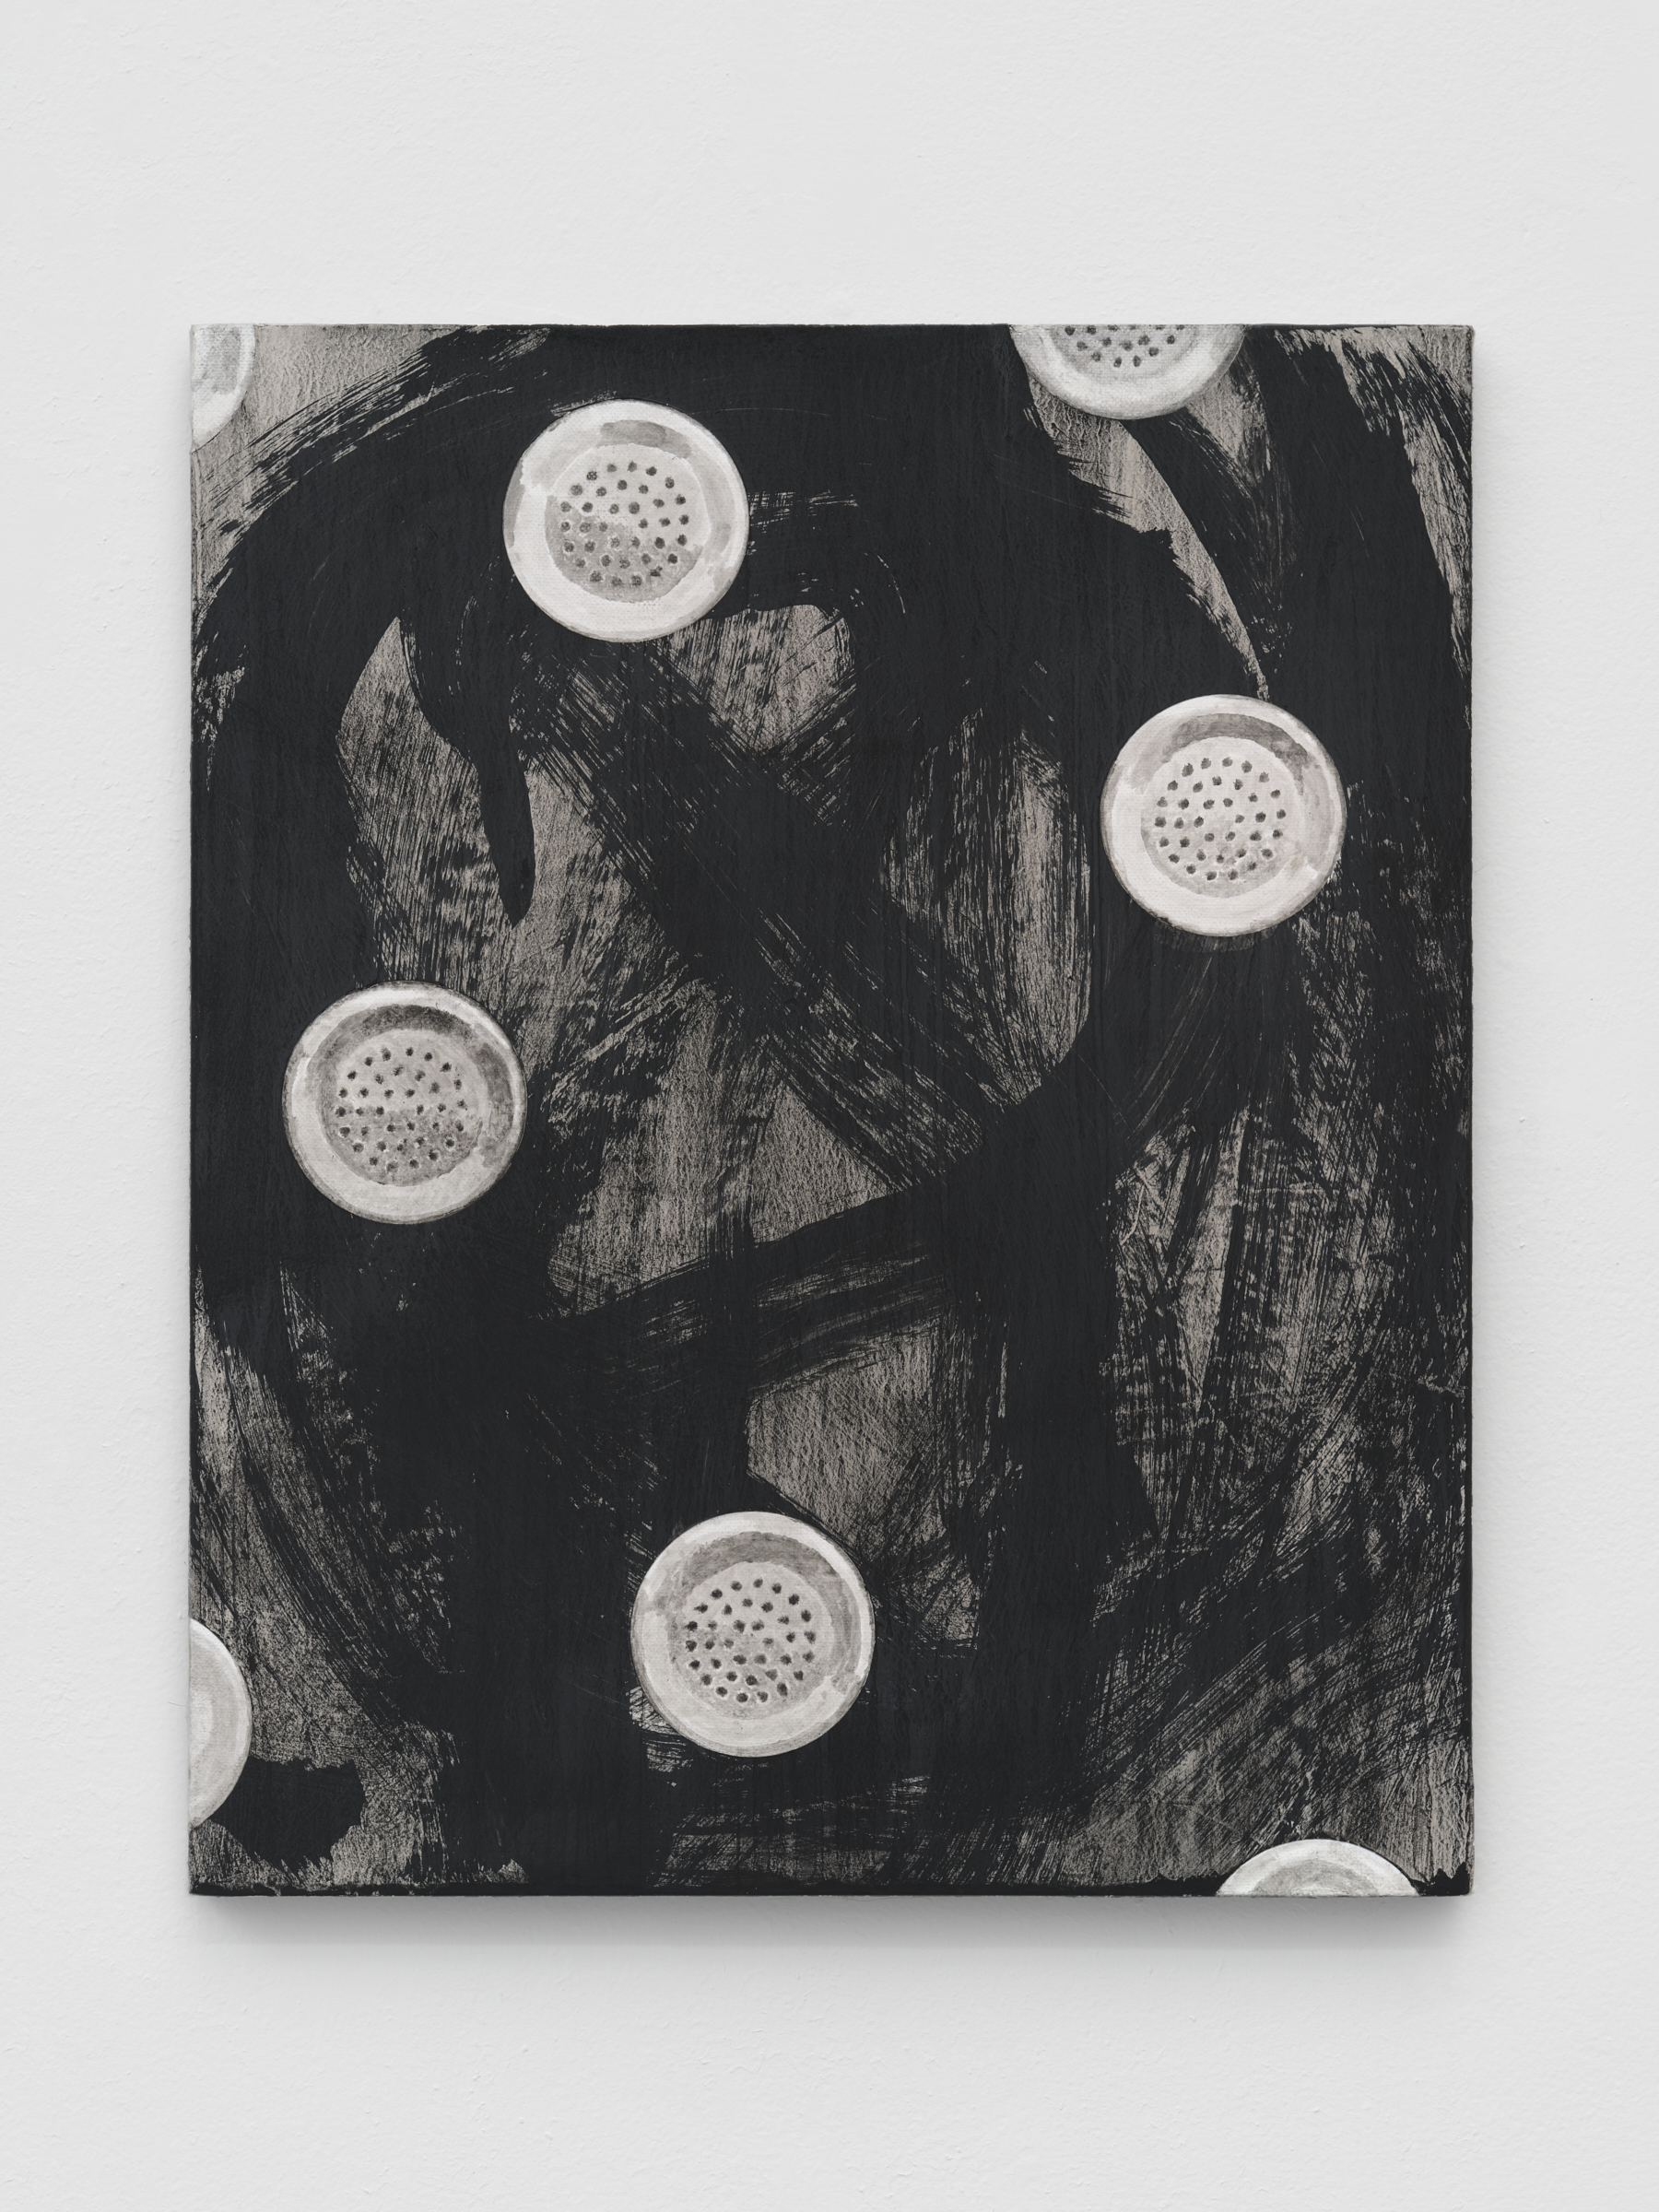 Alex Kwartler, Messages, 2022, Oil and plaster on linen, 20 x 16 in.